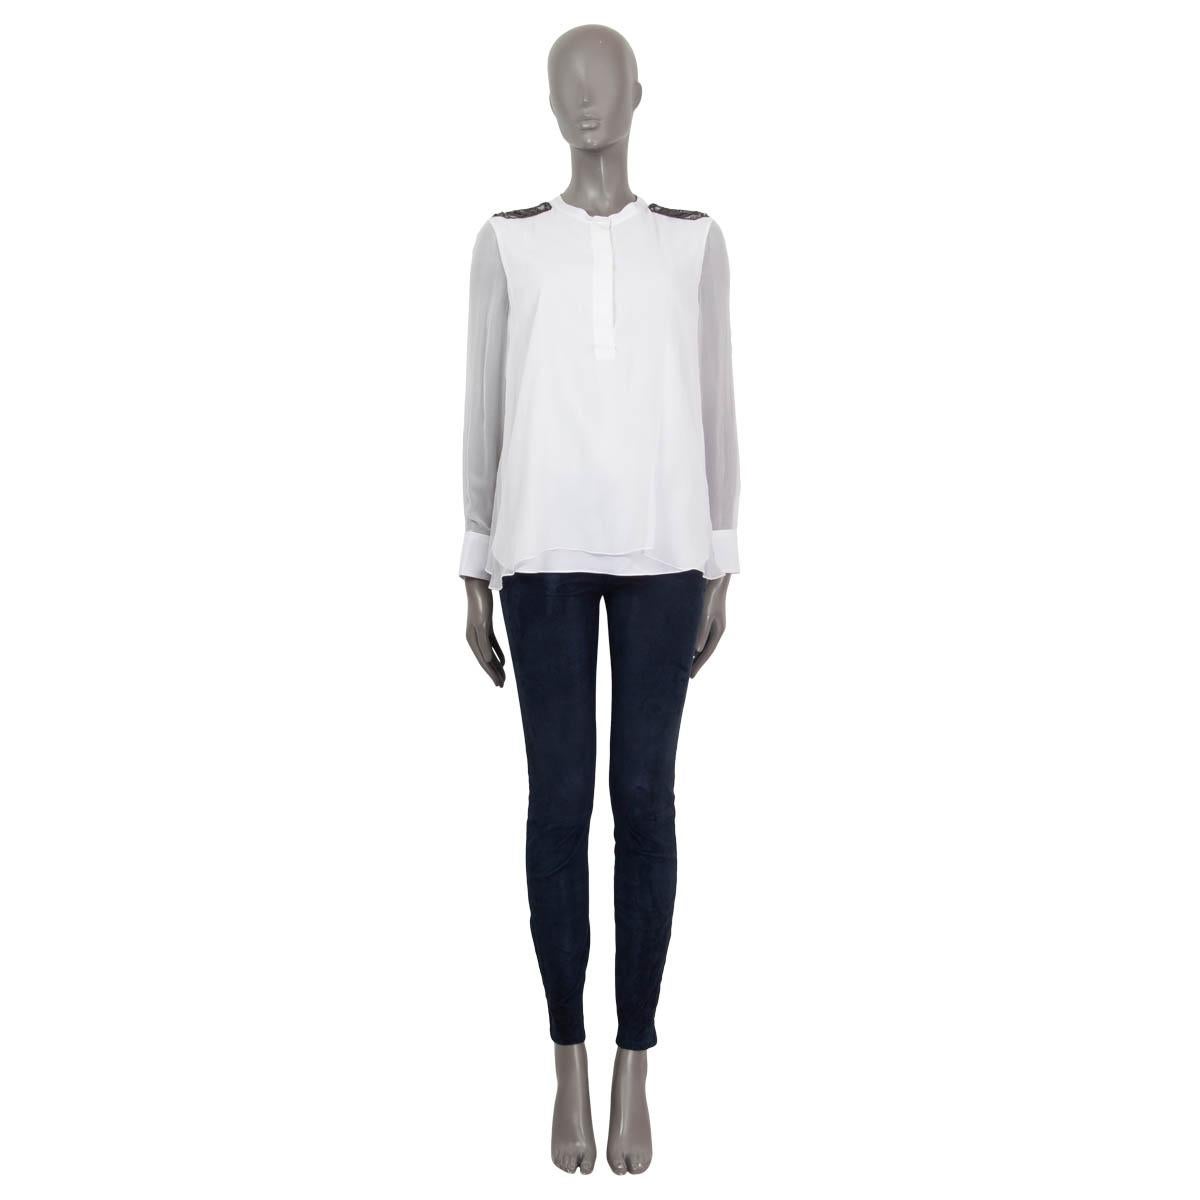 100% authentic Brunello Cucinelli semi sheer blouse in white silk (100%). Features crystal and pearl embroideries on the shoulders and buttoned cuffs. Opens with three concealed buttons on the front. Lined in white silk (92%) and elastane (8%). Has